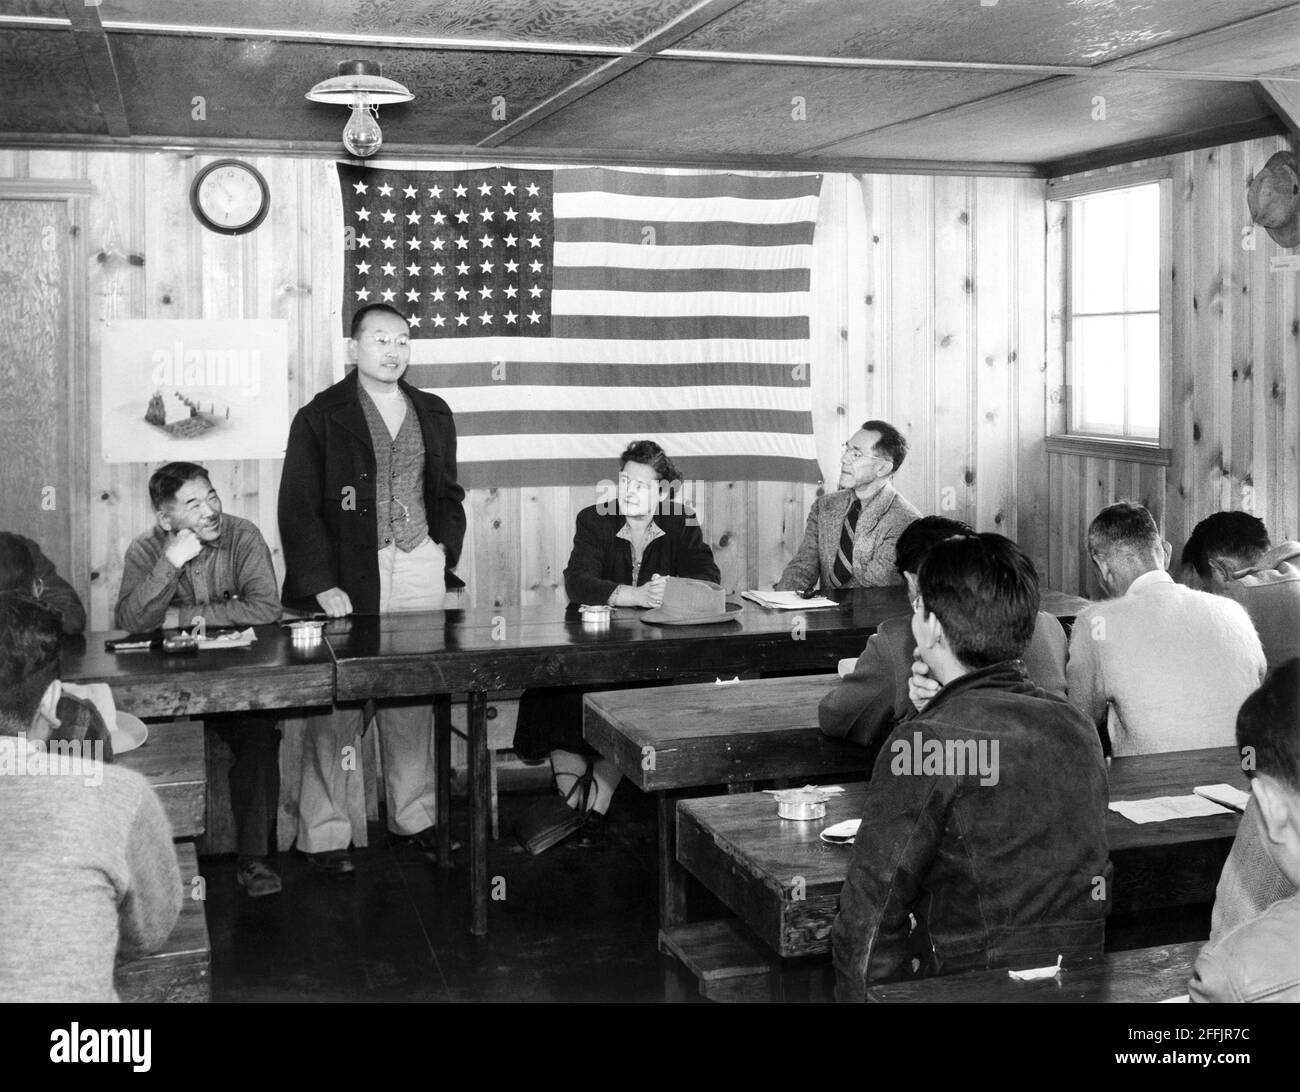 Roy Takeno (standing), addressing group of people at Town Hall Meeting, Manzanar Relocation Center, California, USA, Ansel Adams, Manzanar War Relocation Center Collection, 1943 Stock Photo